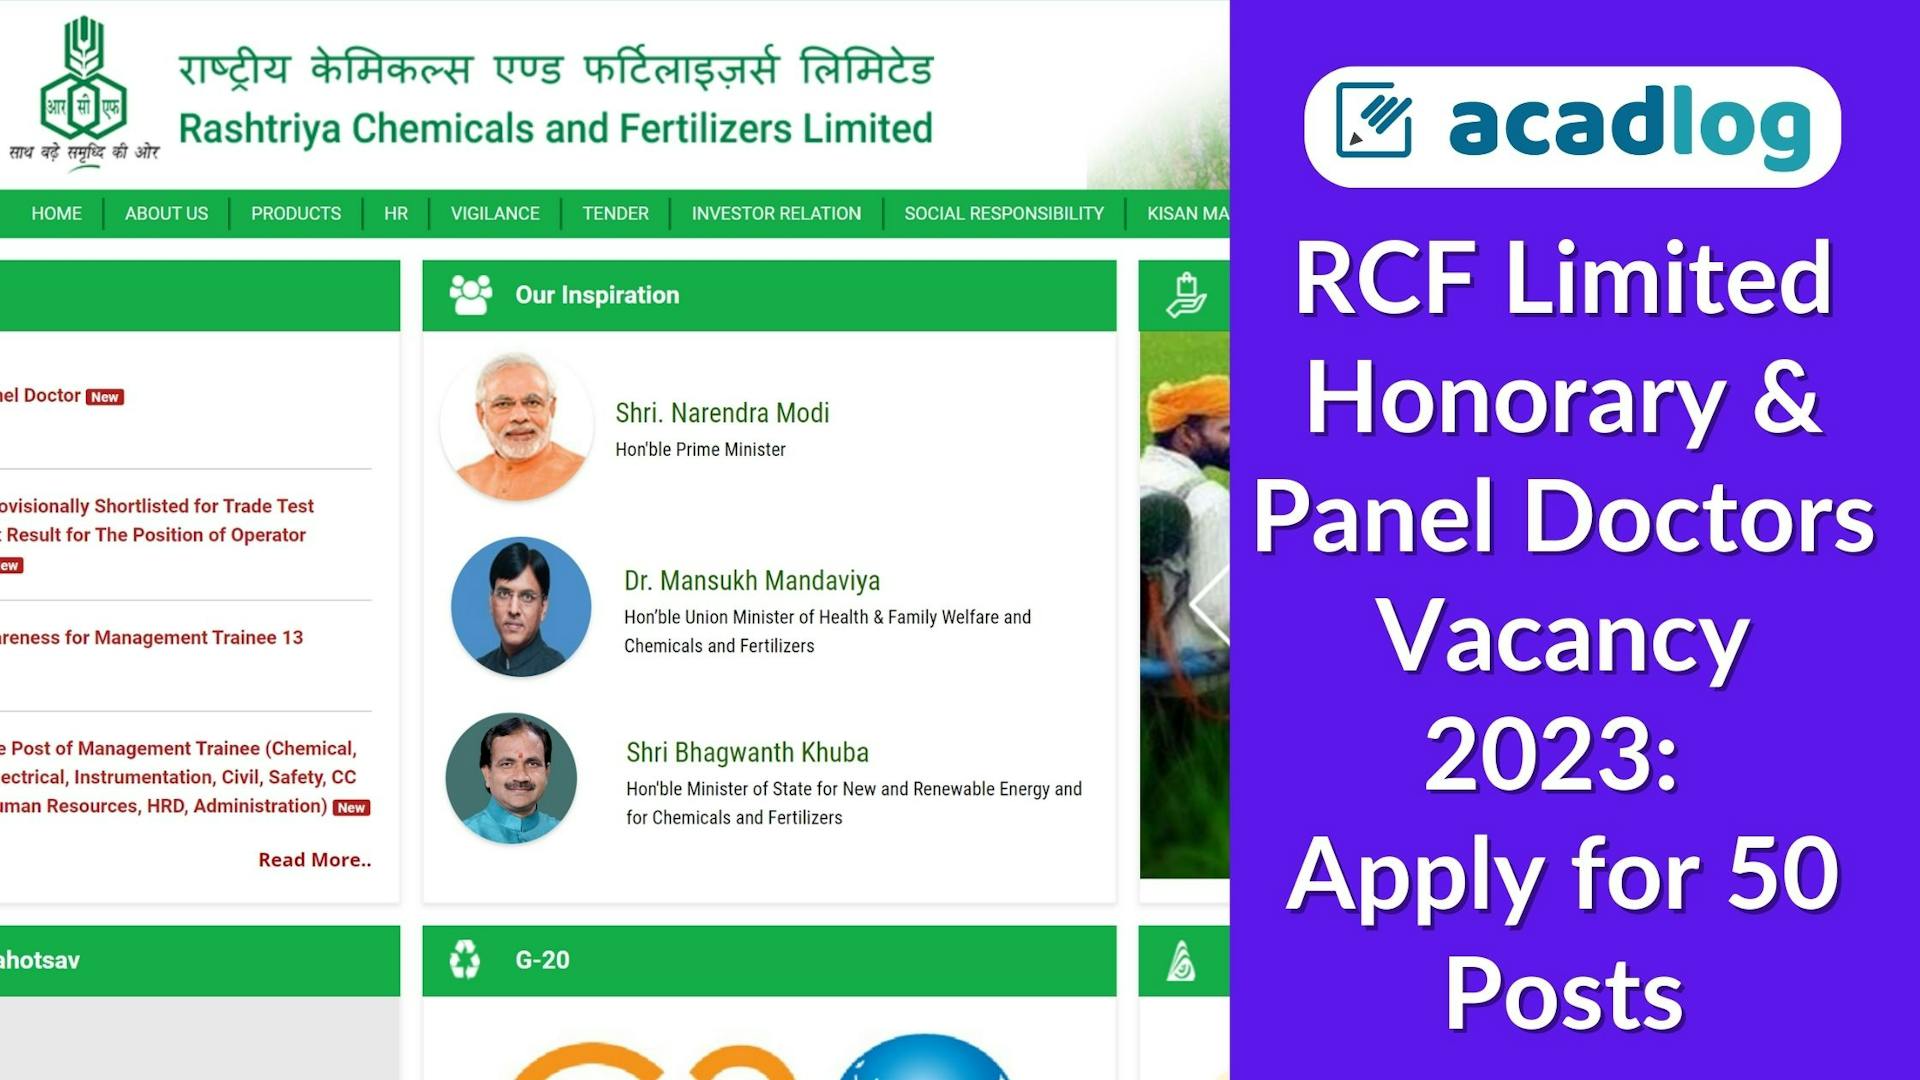 RCF Limited Doctor Vacancy 2023: Apply for 50 Posts